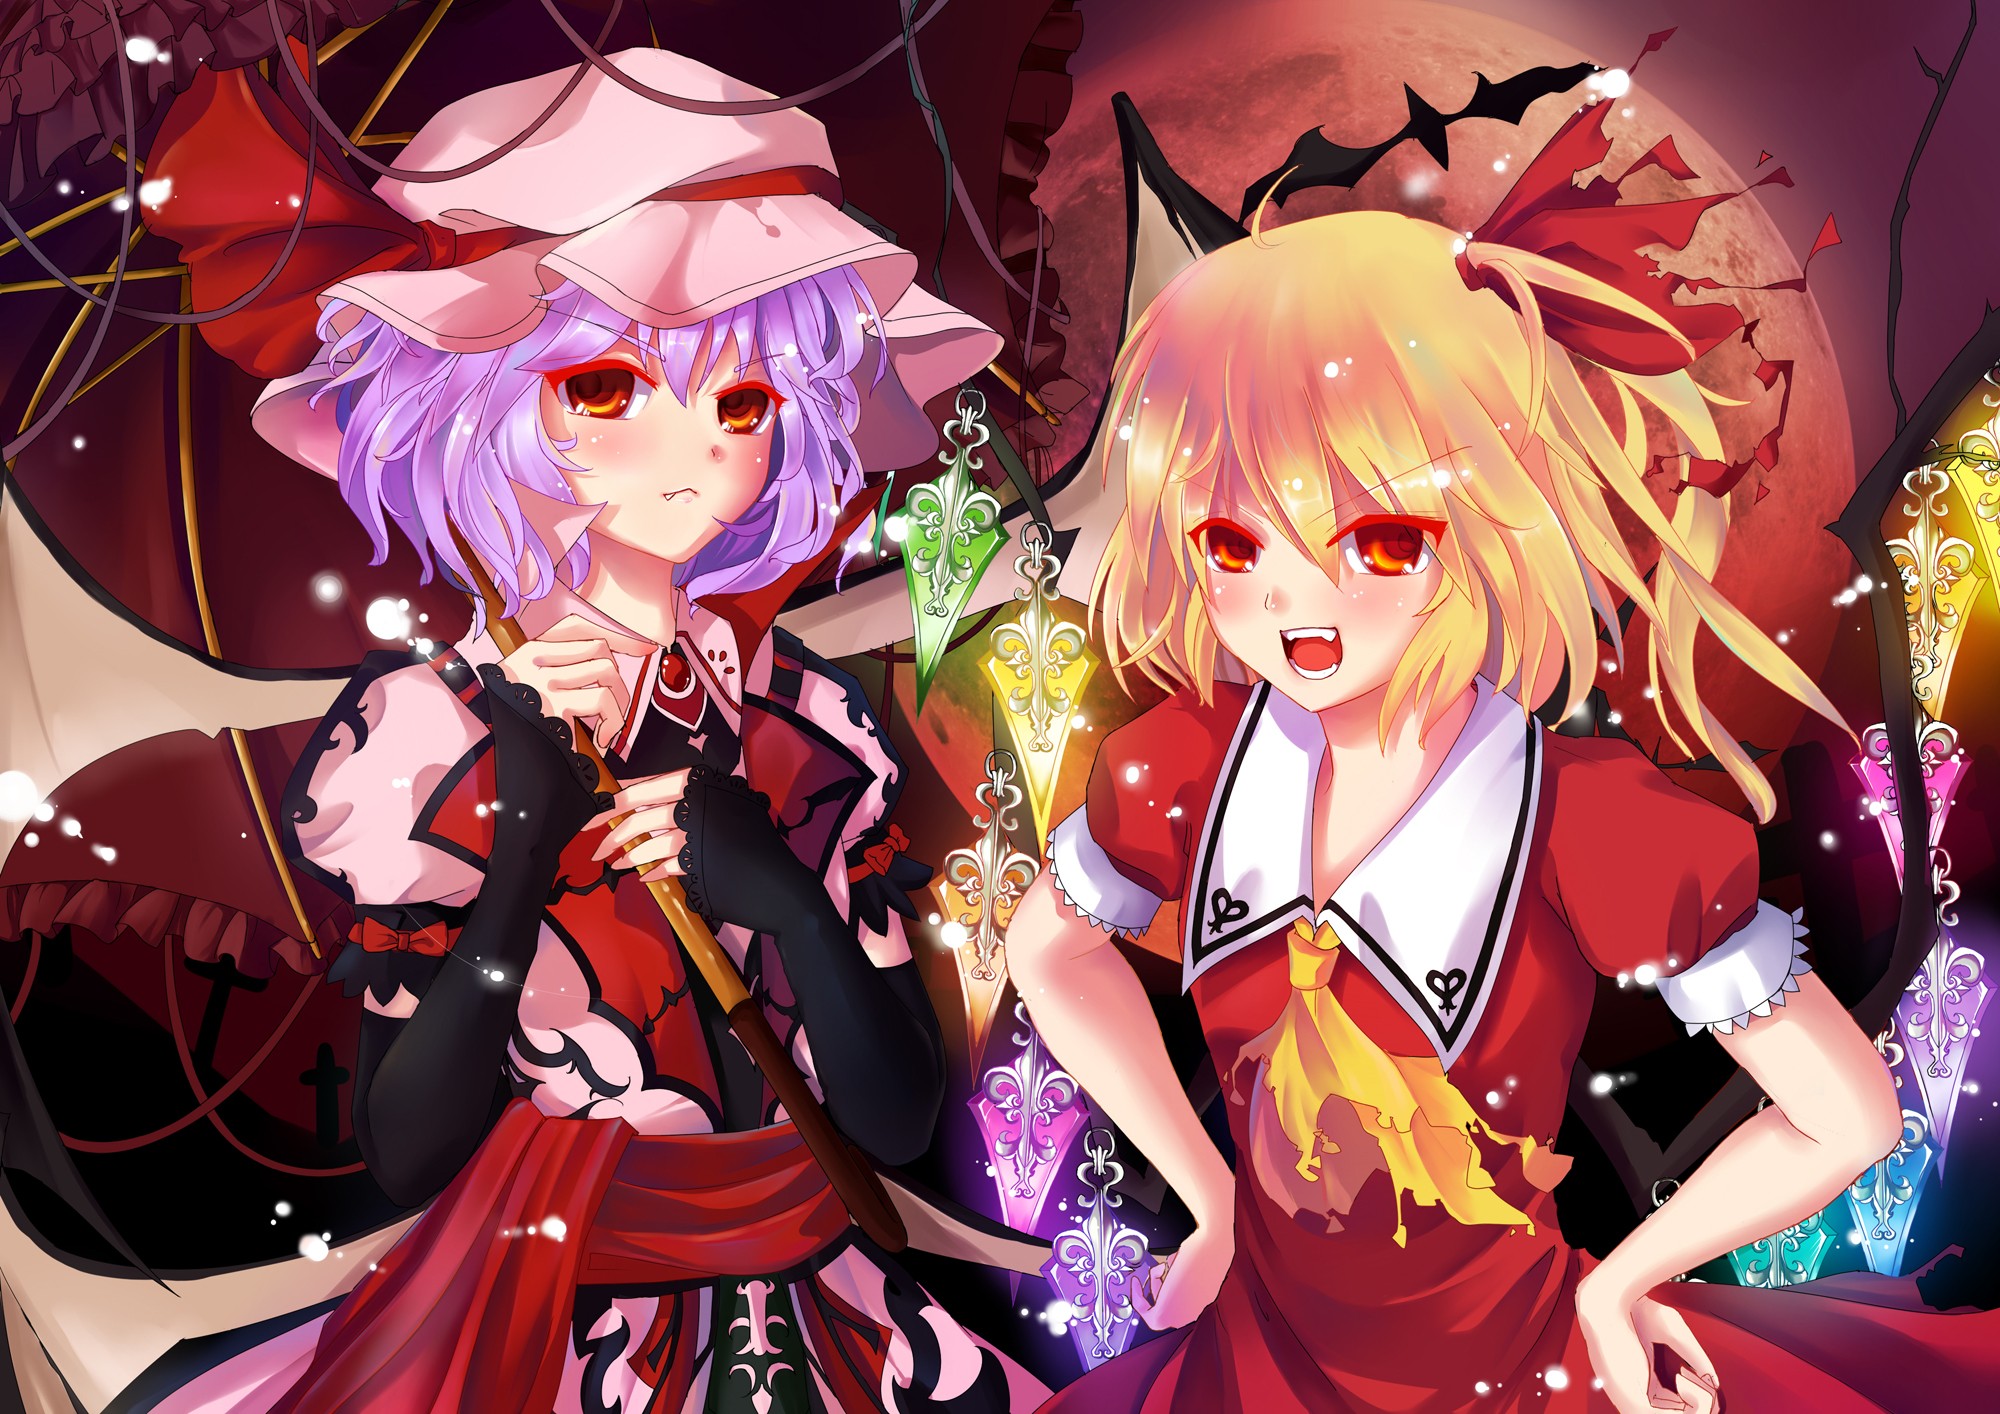 blondes, Video, Games, Touhou, Wings, Cross, Dress, Moon, Vampires, Purple, Hair, Red, Eyes, Short, Hair, Crystals, Blush, Bows, Red, Dress, Sisters, Open, Mouth, Fangs, Gems, Ponytails, Umbrellas, Flandre, Scarl Wallpaper